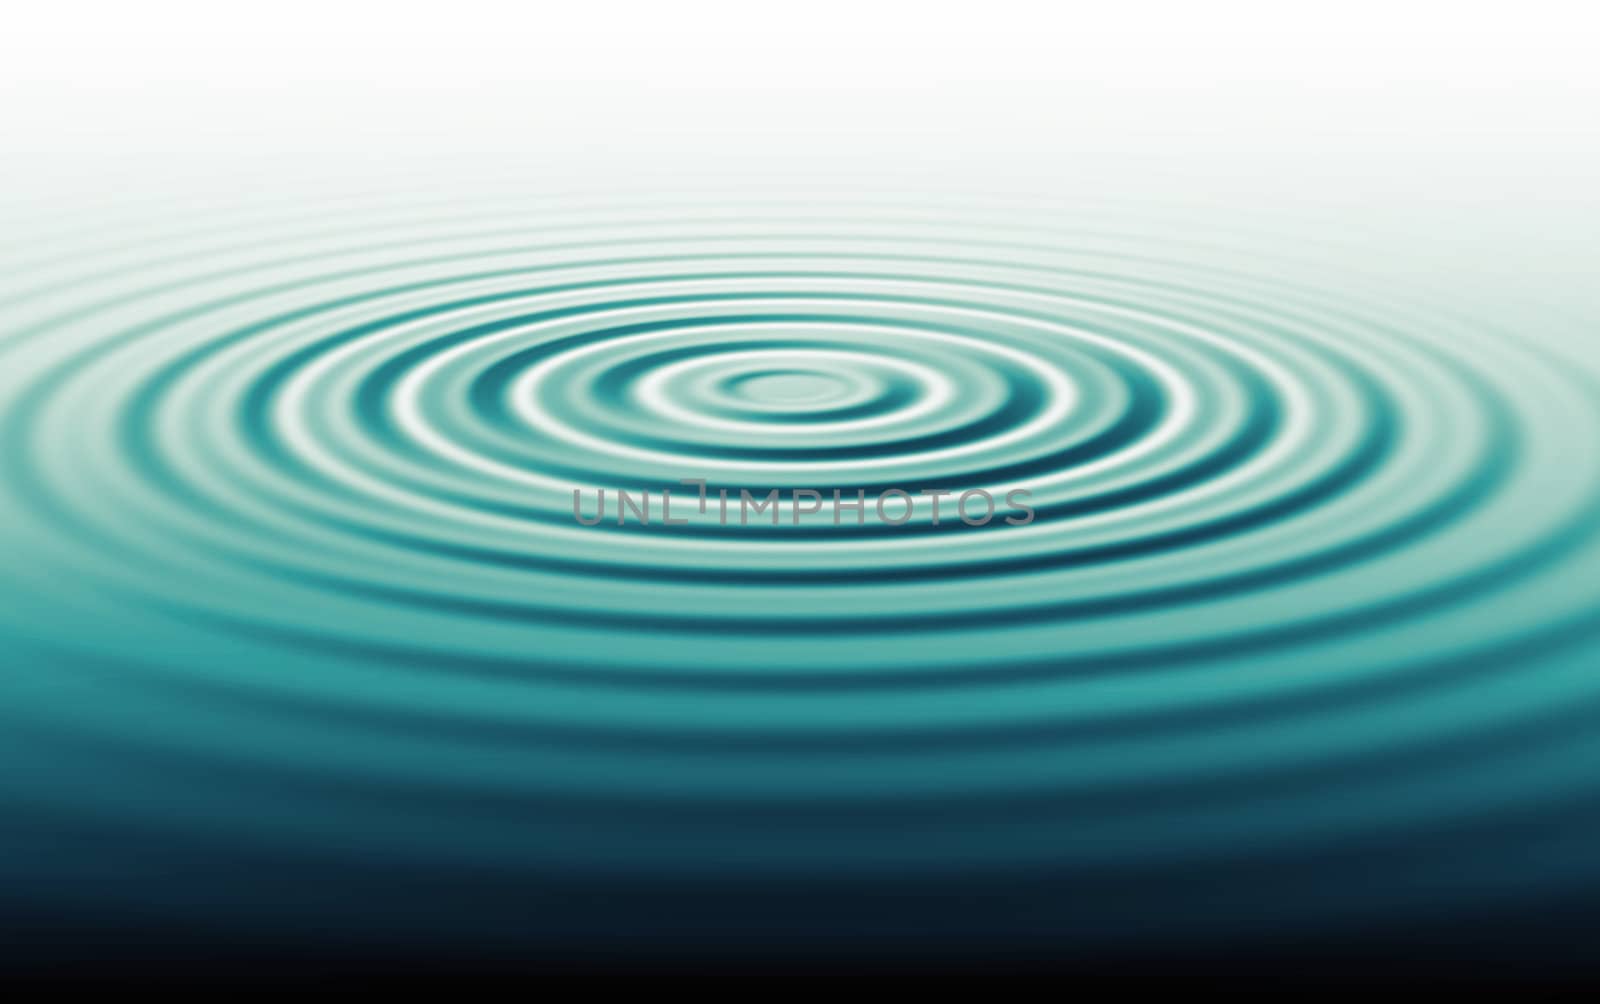 Rippled water waves illustration background